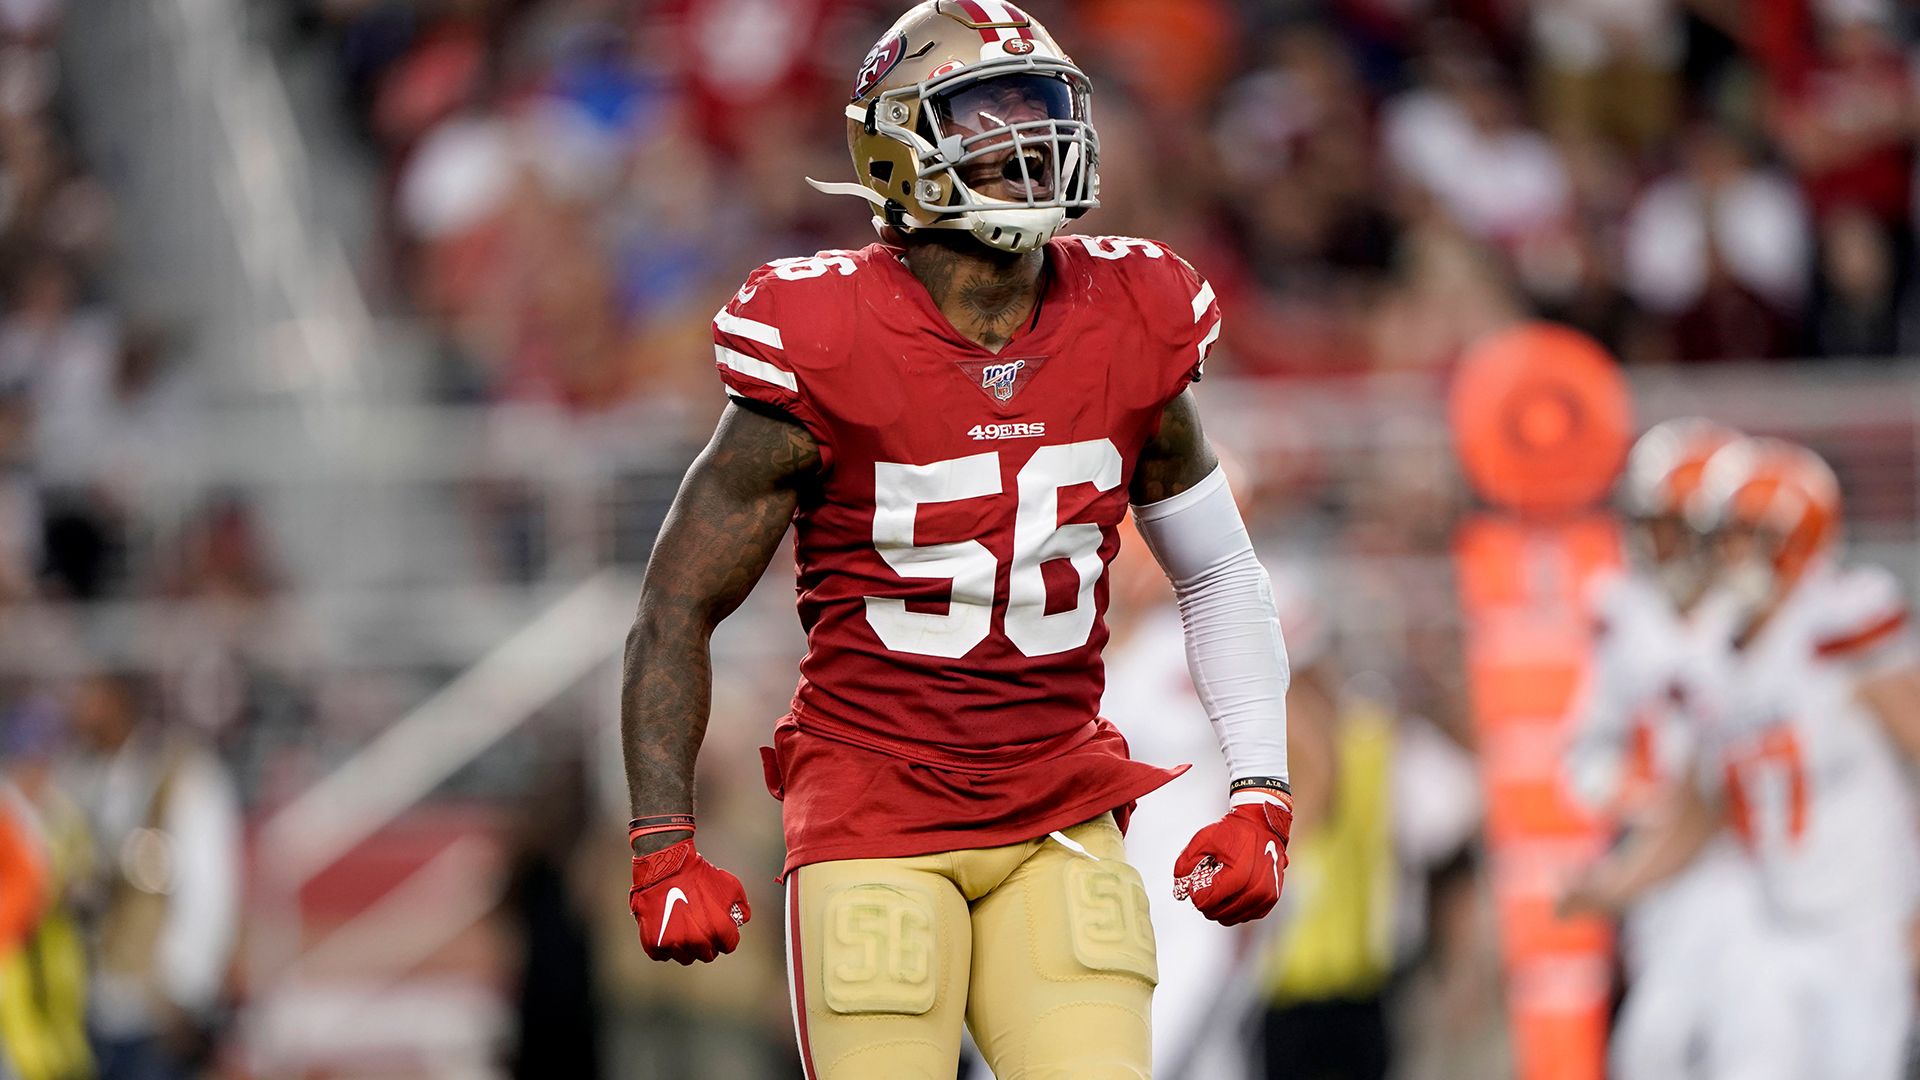 Kwon Alexander explains how fiery mentality sets tone for 49ers